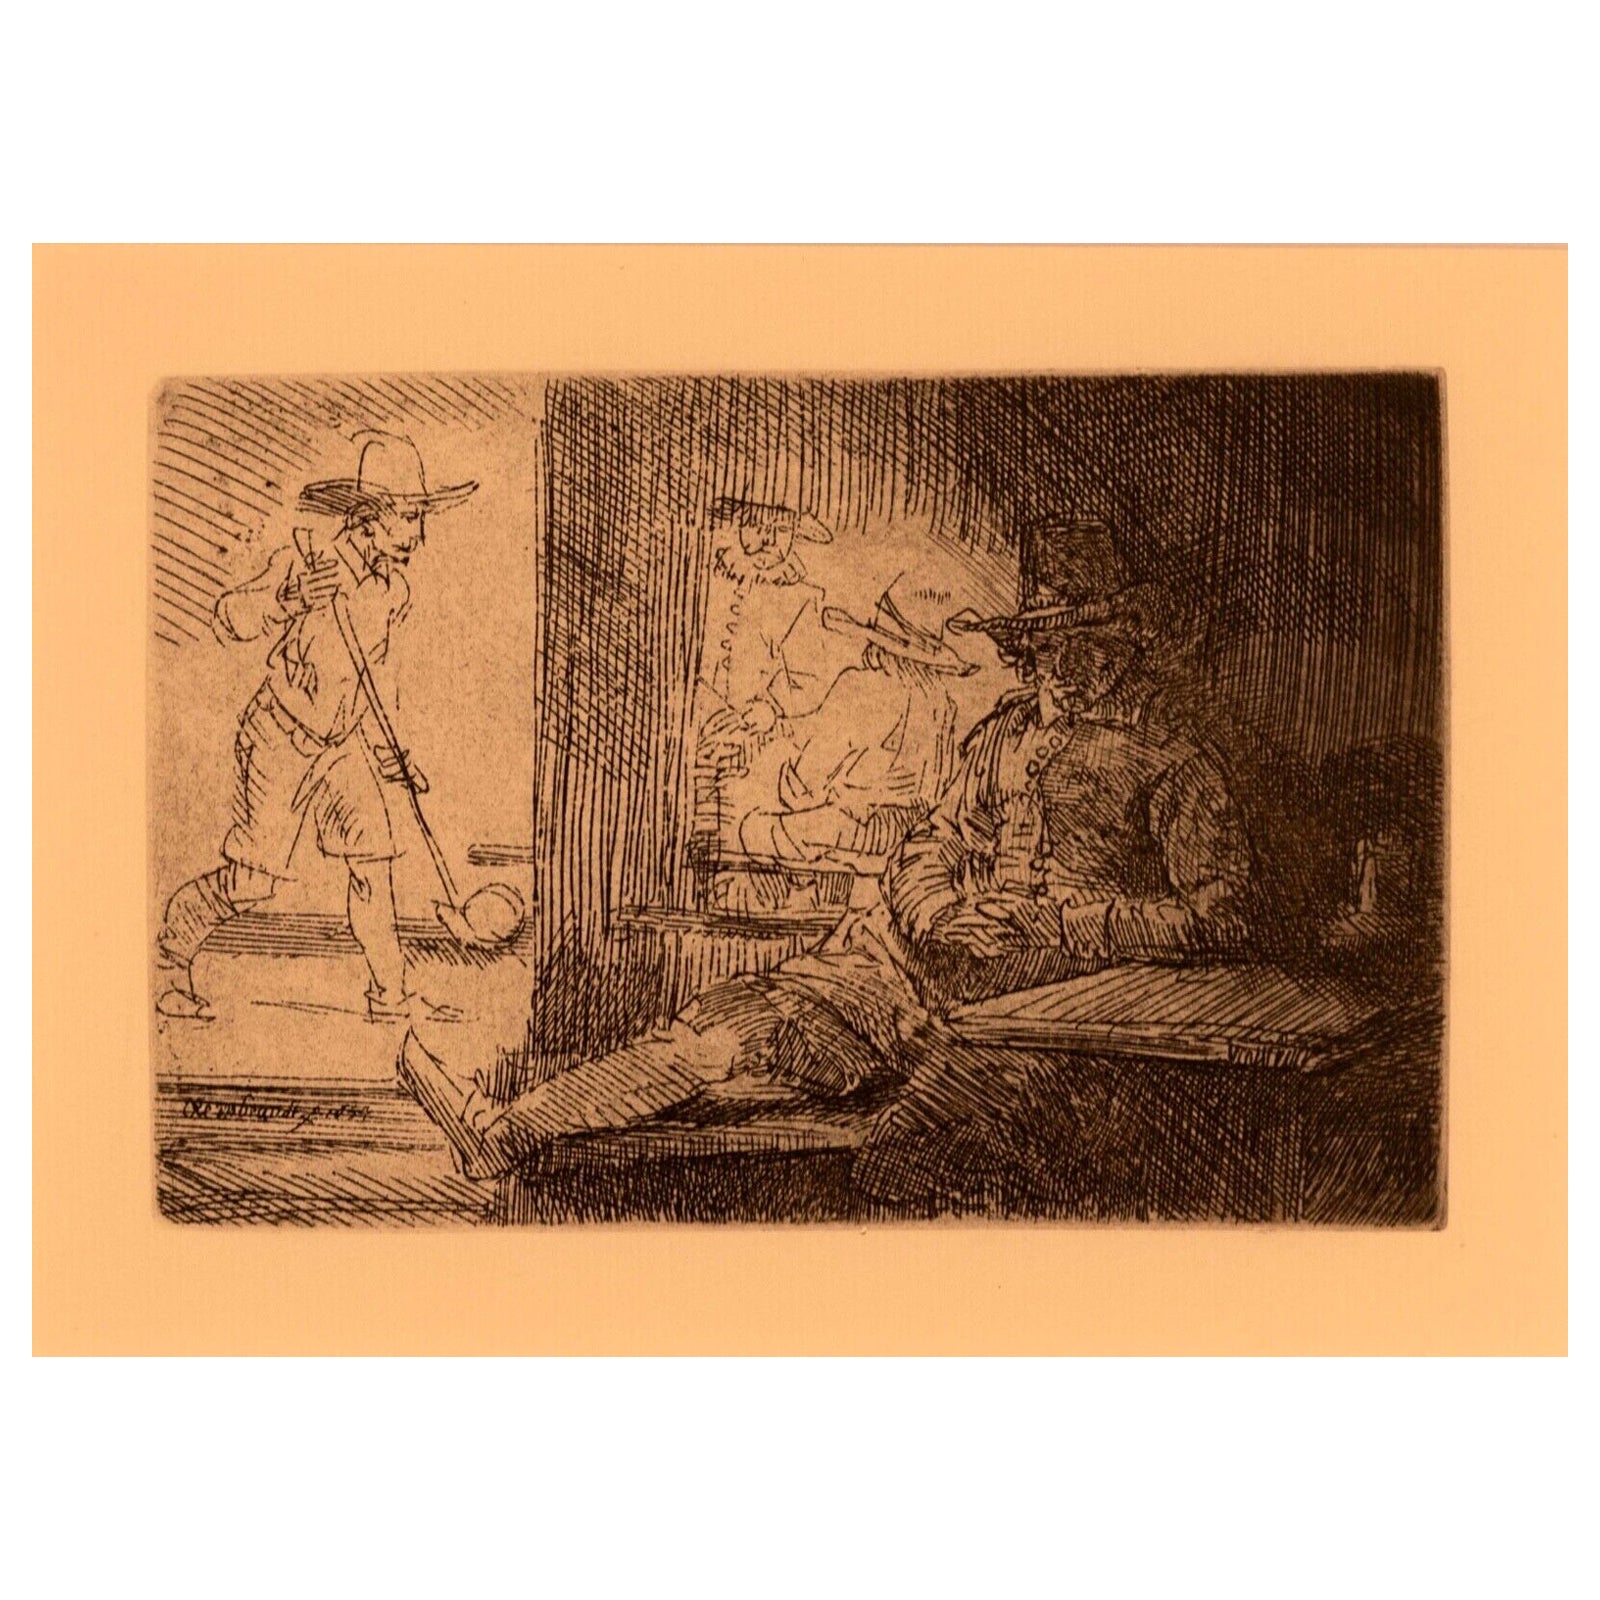 Rembrandt Van Rijn The Golf Player 1654 Etching Millenium Edition Framed For Sale